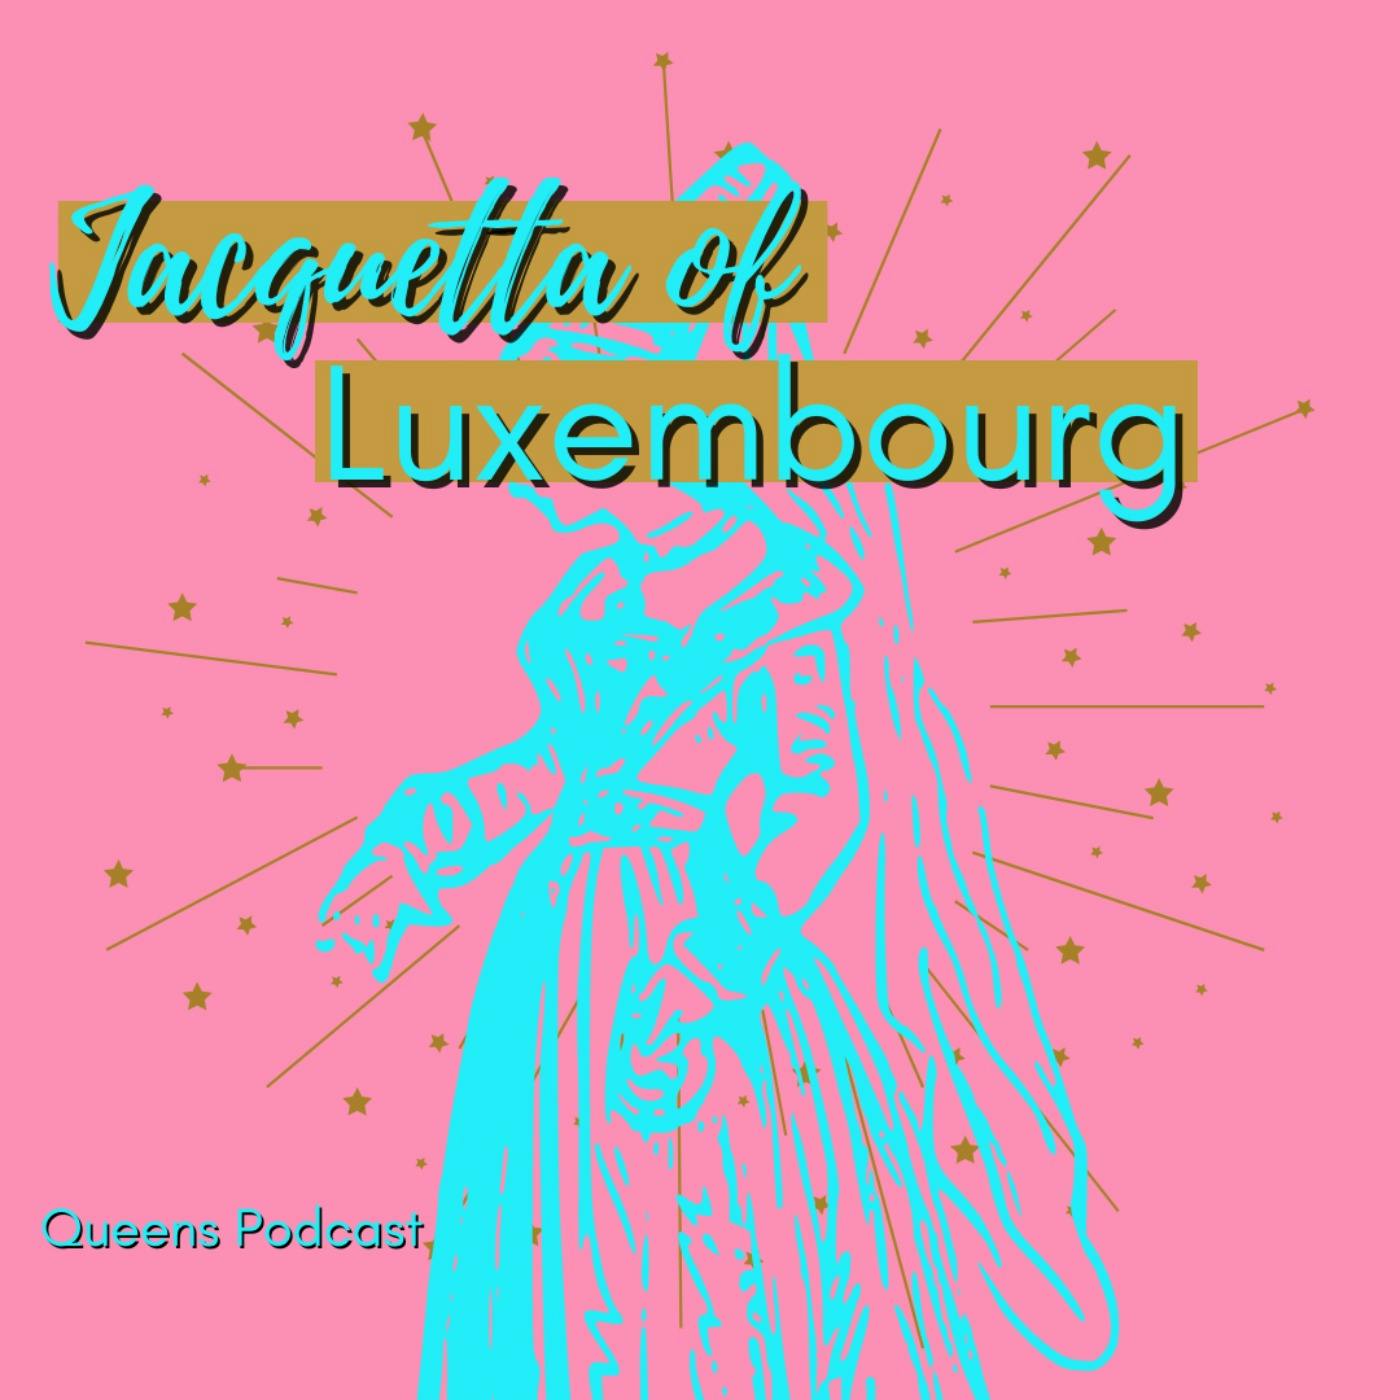 Jacquetta of Luxembourg part 2